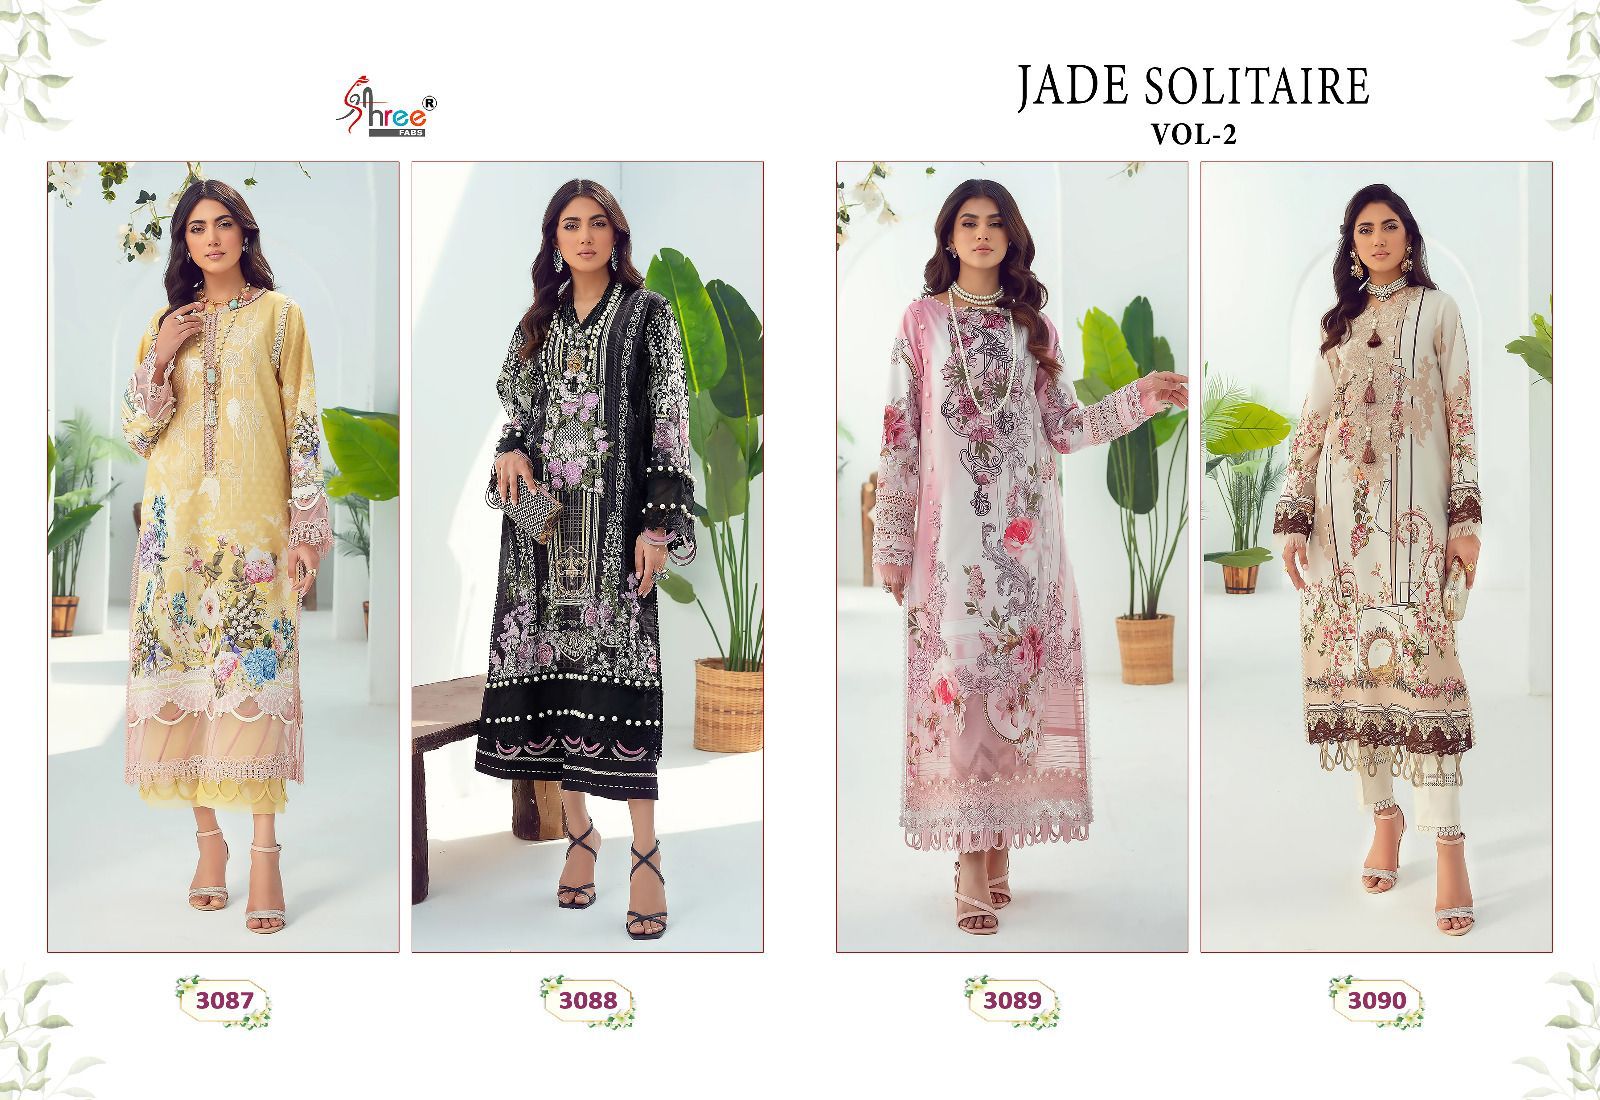 Shree Jade Solitaire Vol 2 collection 3